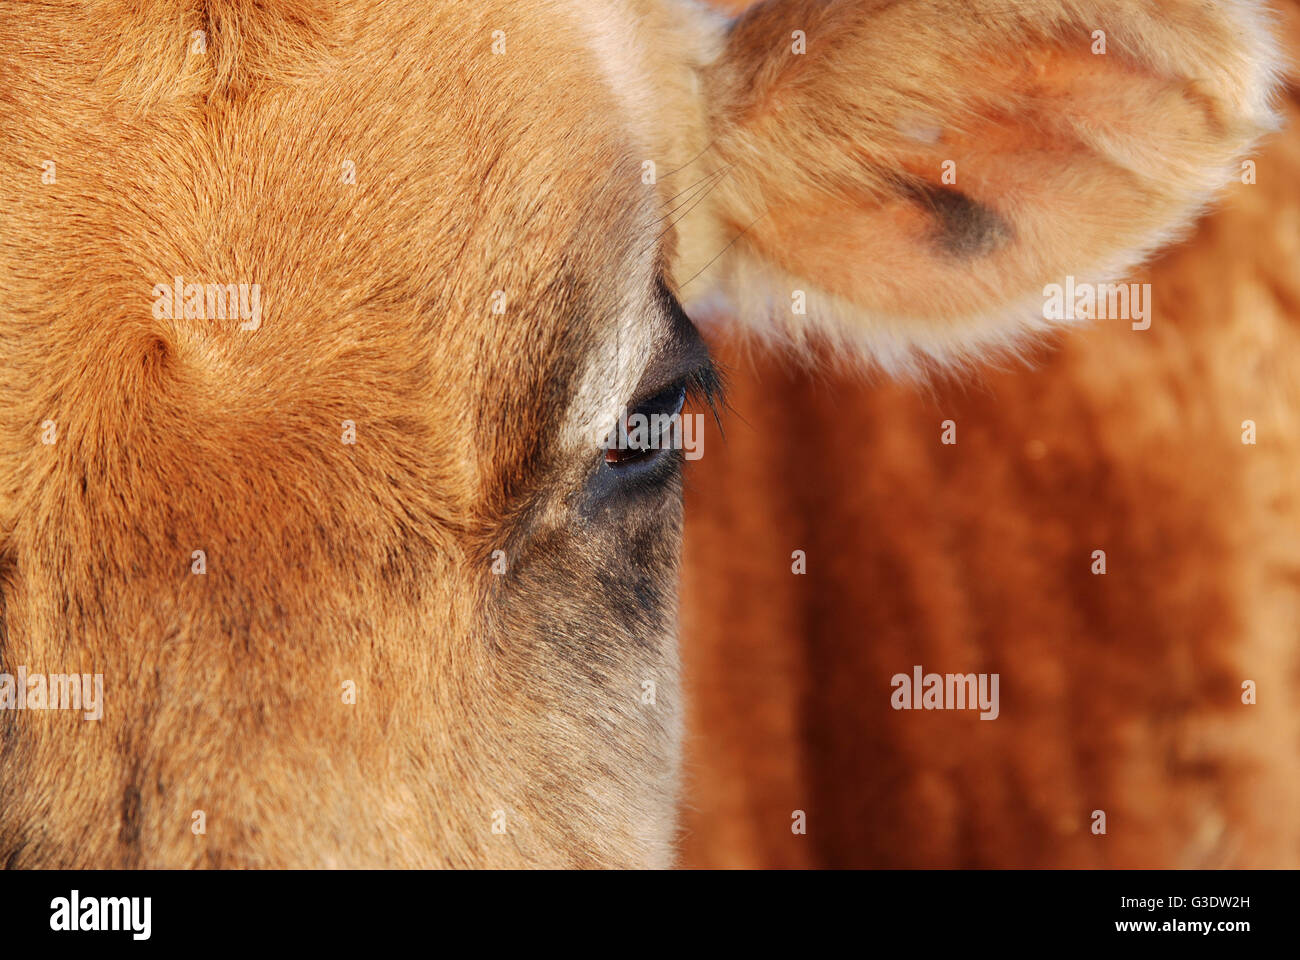 Close up photo of a cow's face with focus on the eye and out of focus body Stock Photo